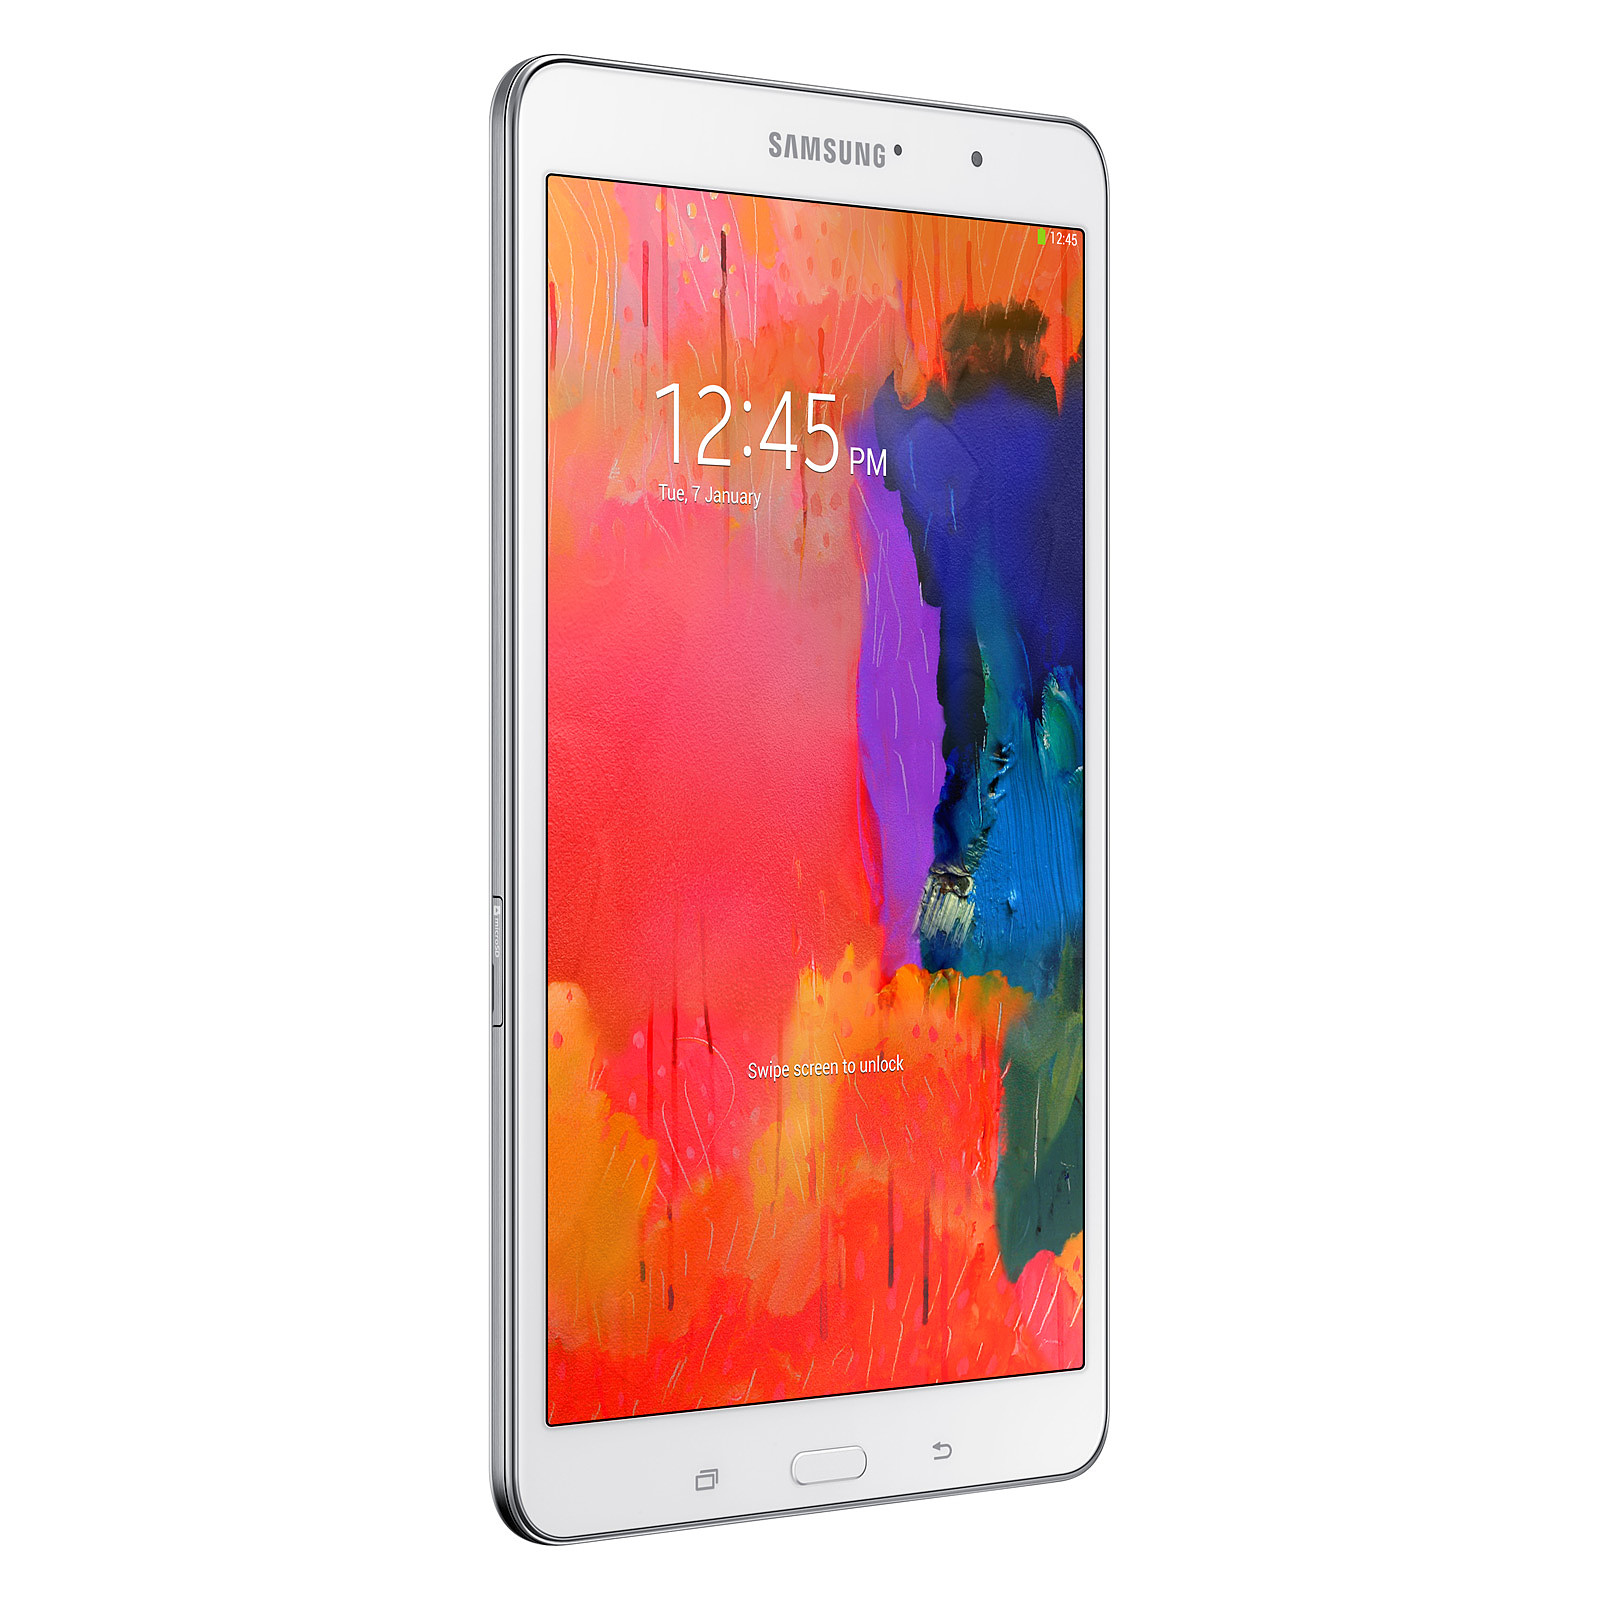 Samsung Galaxy Tab Pro 8.4" SM-T320 16 Go Blanc · Reconditionne - Tablette tactile Samsung